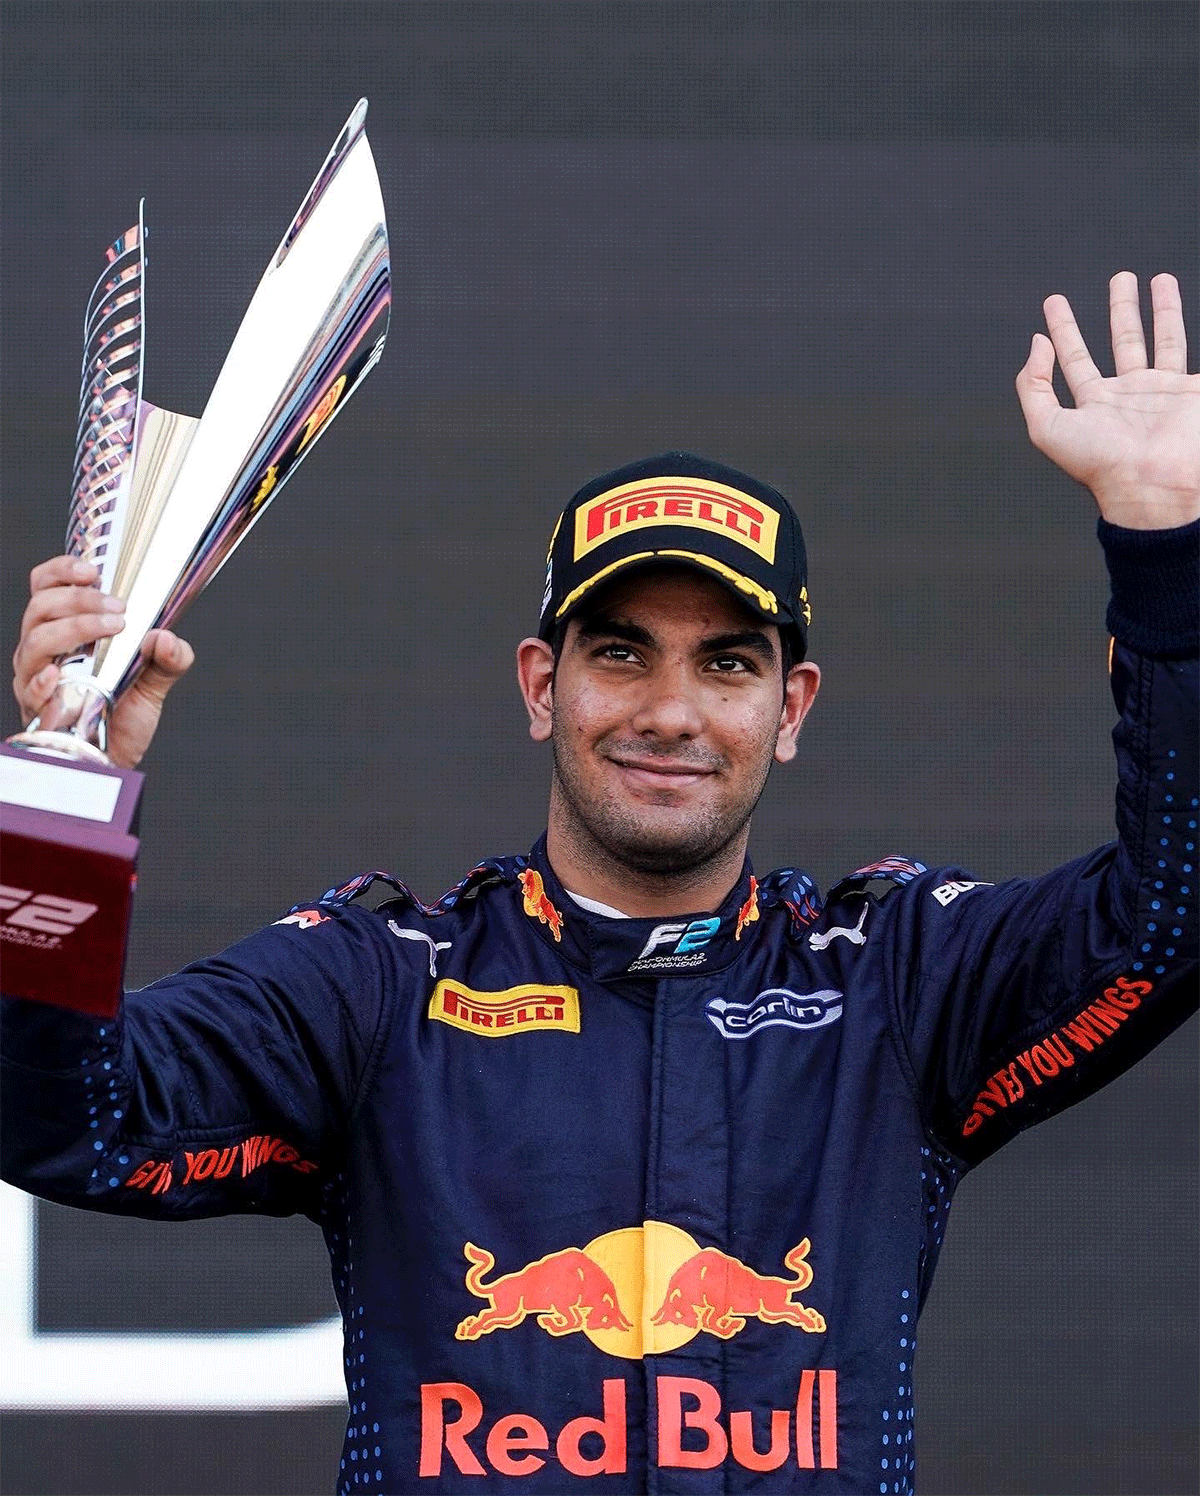 The sprint race victory was Jehan's third of his Formula 2 career after Bahrain last year and Monza earlier this year.